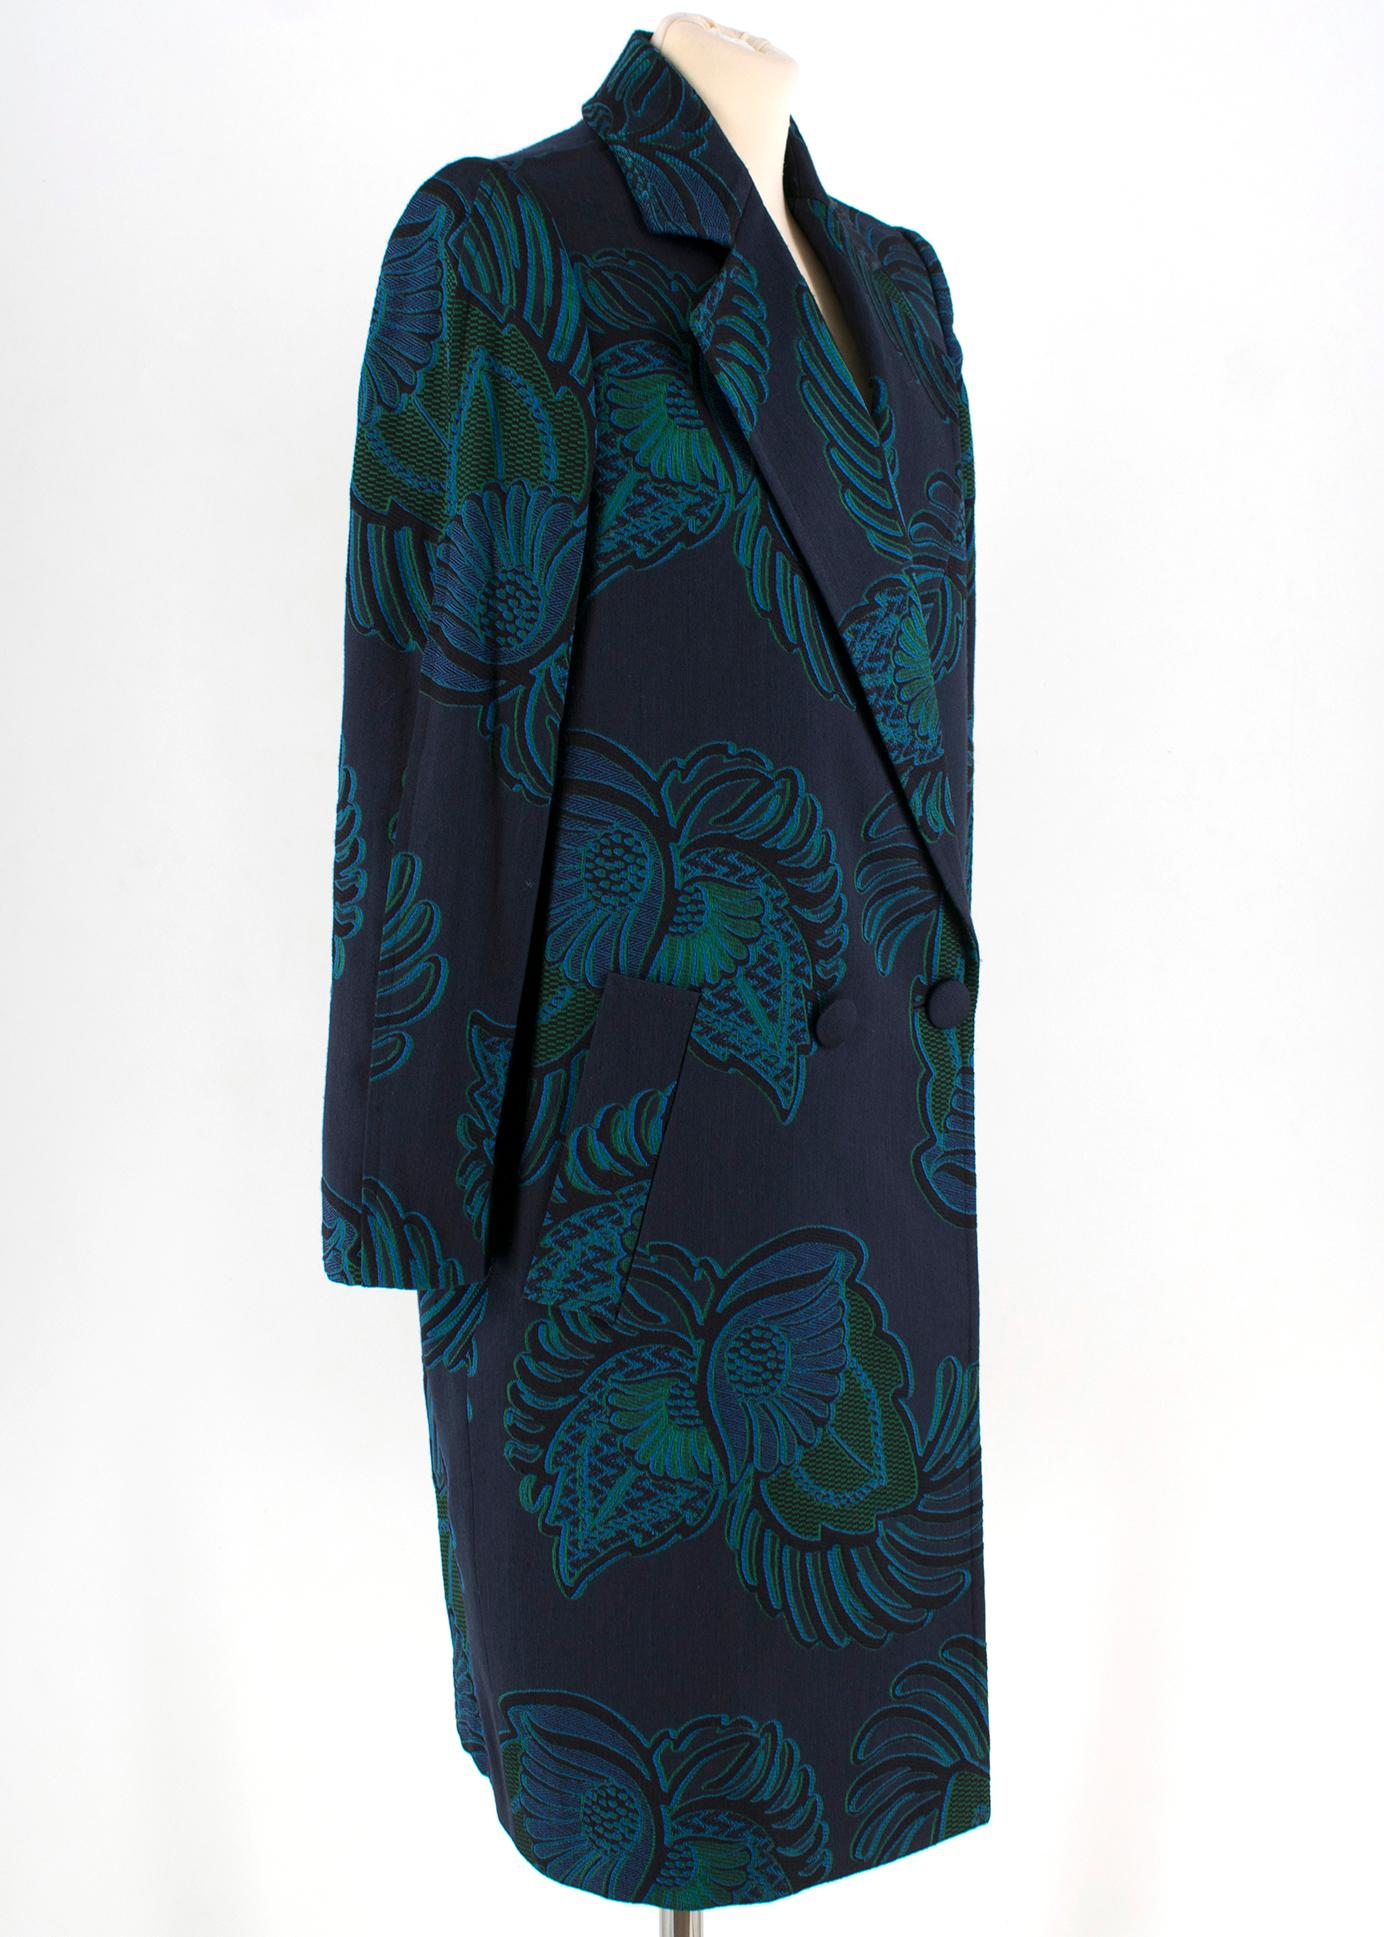 Stella McCartney Navy & Green Wool Coat

- navy wool coat 
- green and blue thread embellished
- lined
- button fastening to the middle 

Please note, these items are pre-owned and may show some signs of storage, even when unworn and unused. This is